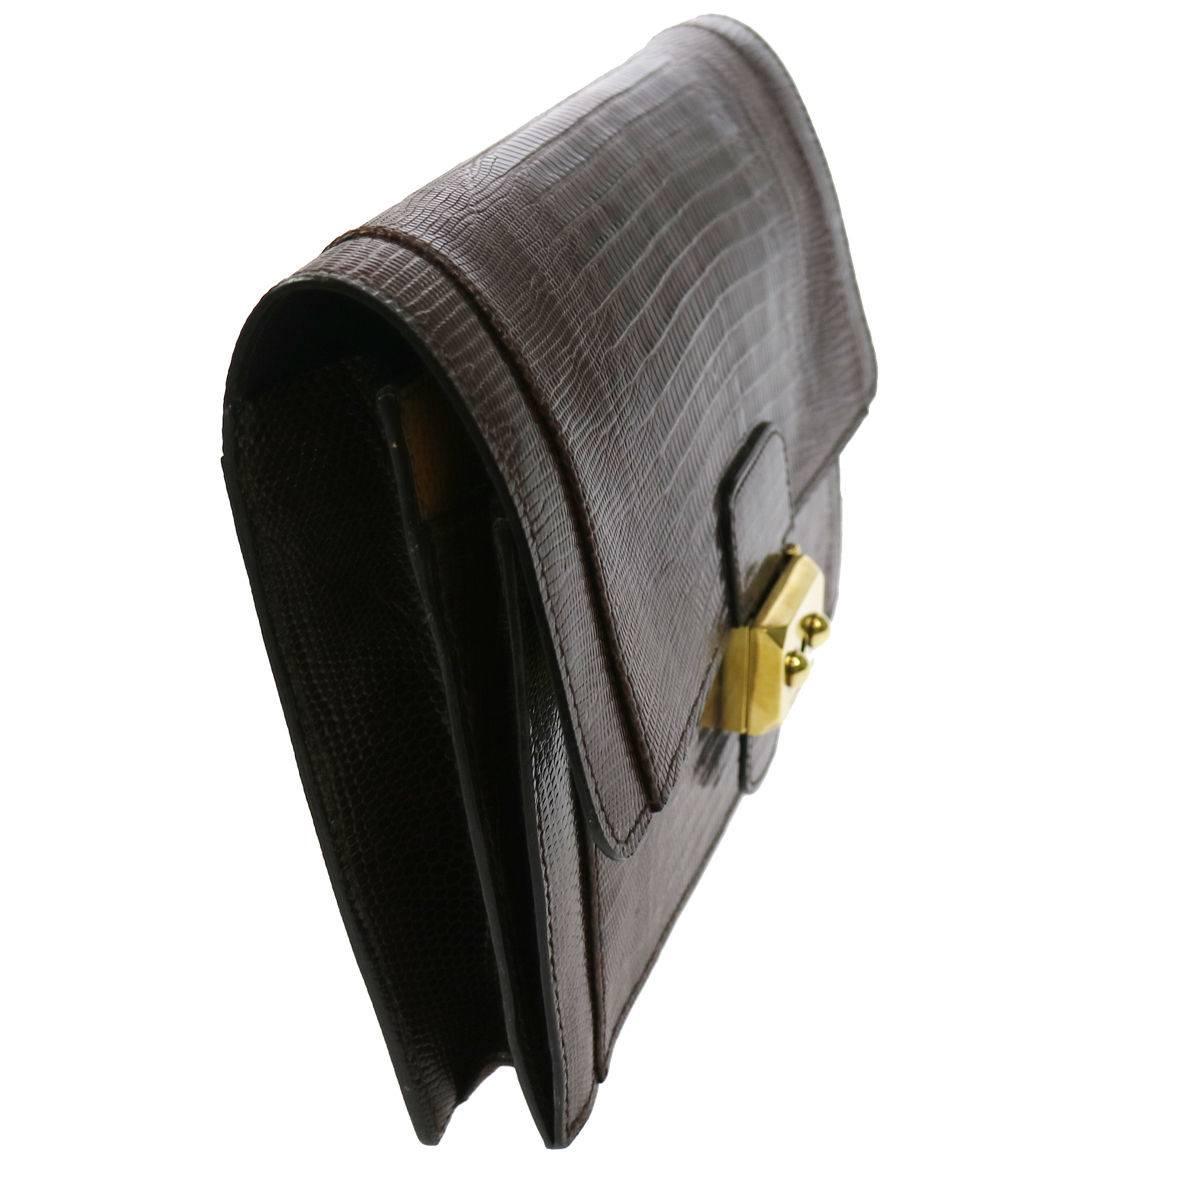 CURATOR'S NOTES

Hermes Chocolate Brown Lizard Leather Gold Envelope Evening Flap Wristlet Clutch Bag  

Lizard
Gold tone hardware
Push lock closure
Leather lining
Made in France
Measures 9.5" W x 6.75" H x 1" D 
Includes original